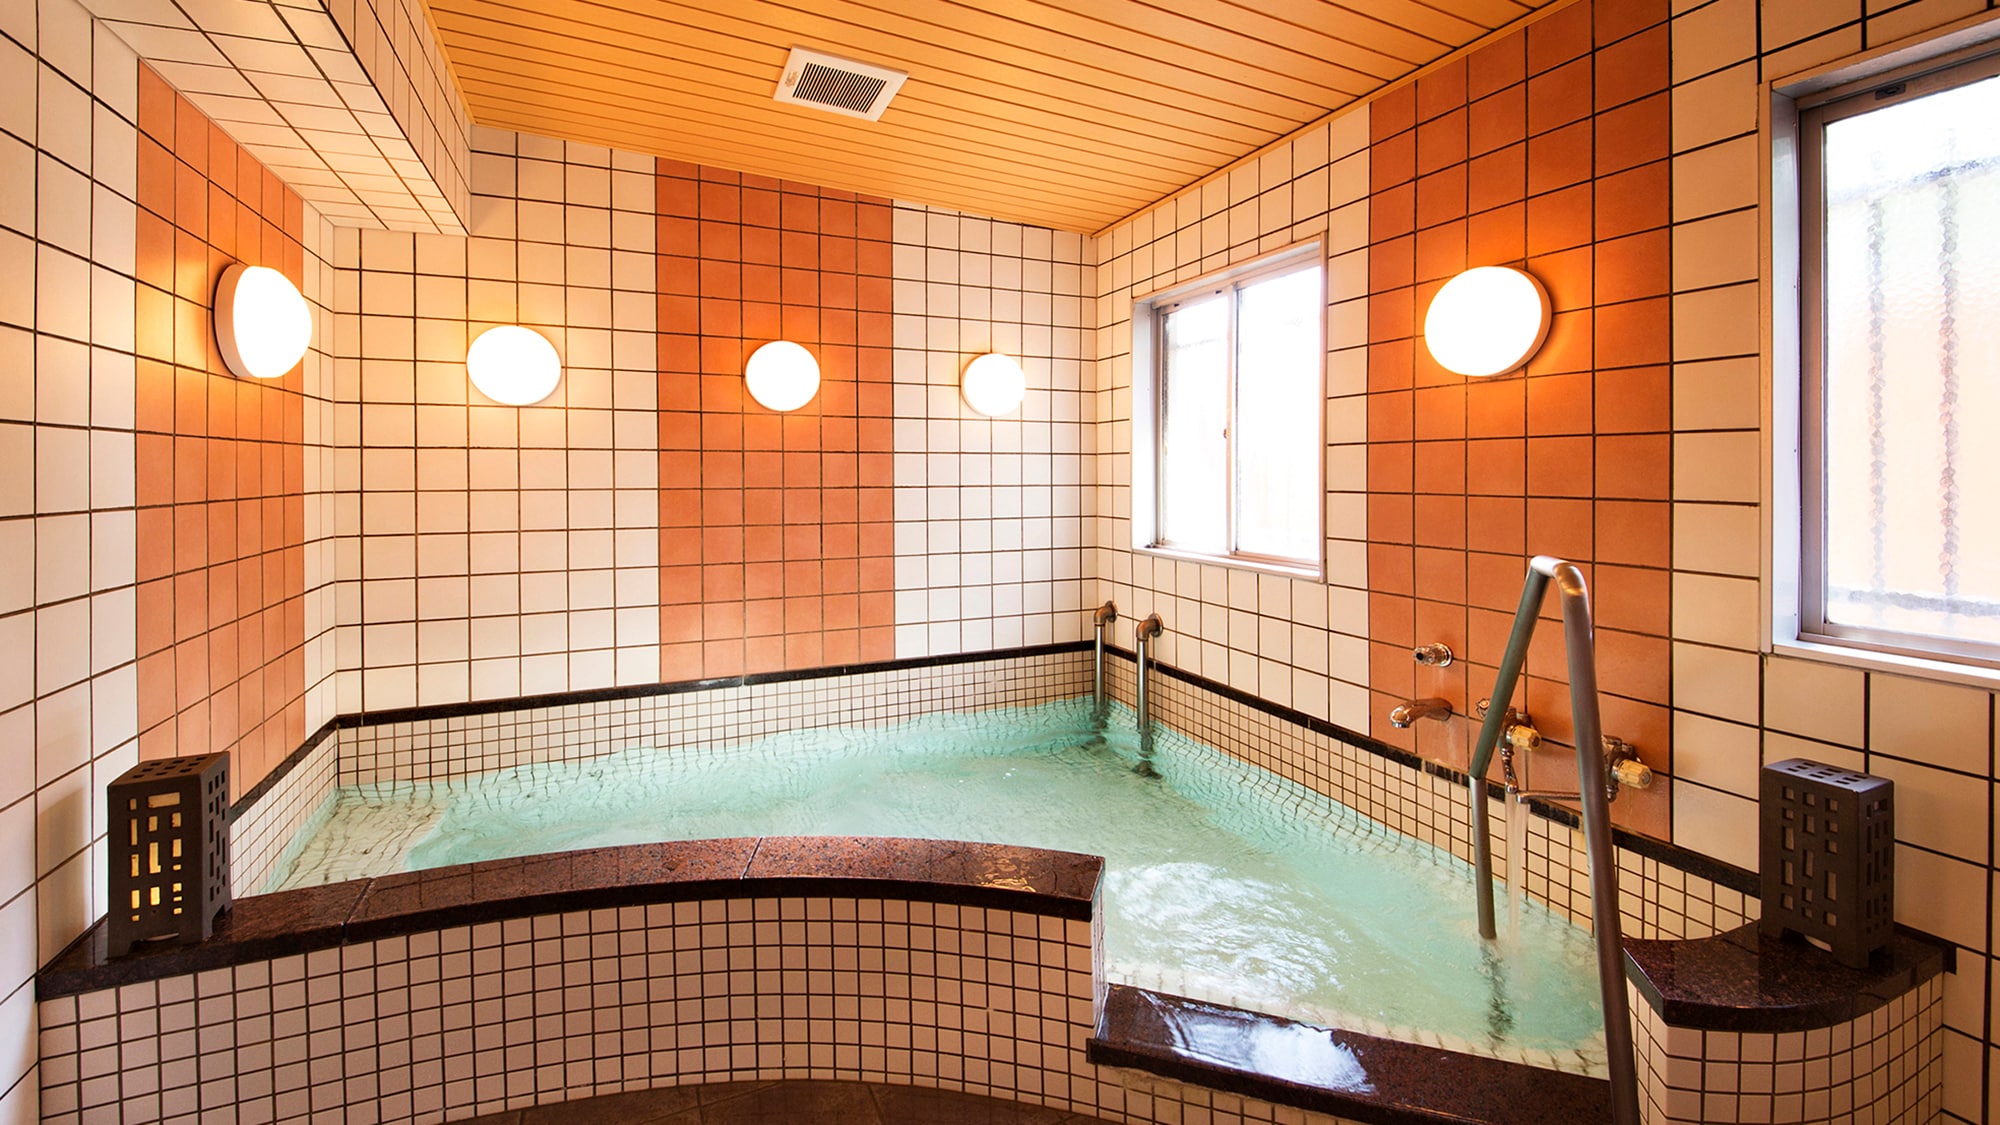 ■ Large communal bath for men ■ Hours of use 17: 00-24: 00